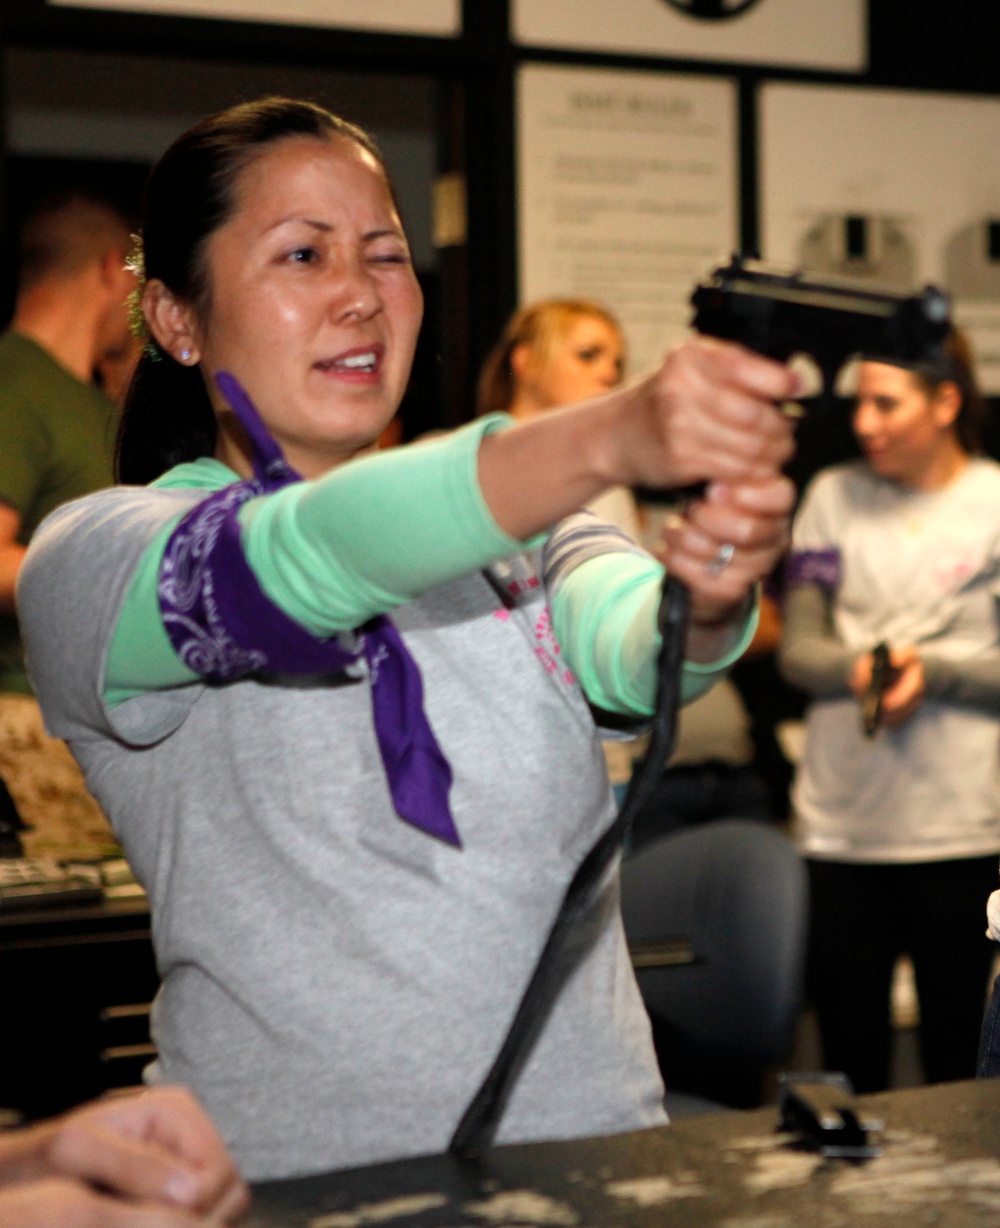 Wives fly, shoot, fight like Marines to learn about Marines